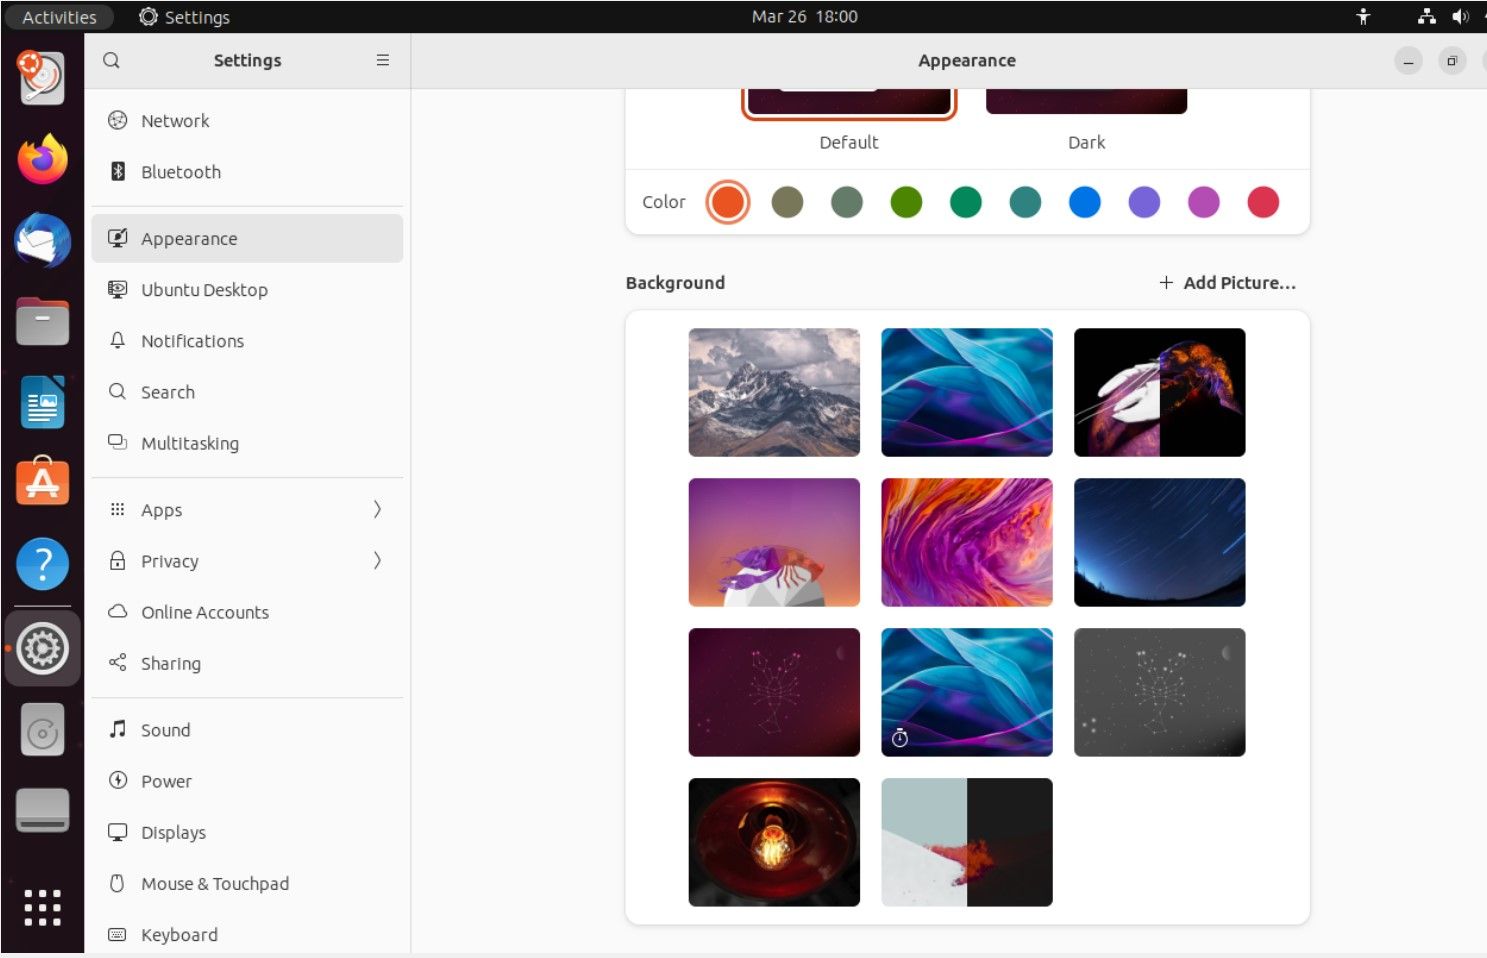 Ubuntu settings page with different wallpaper listings